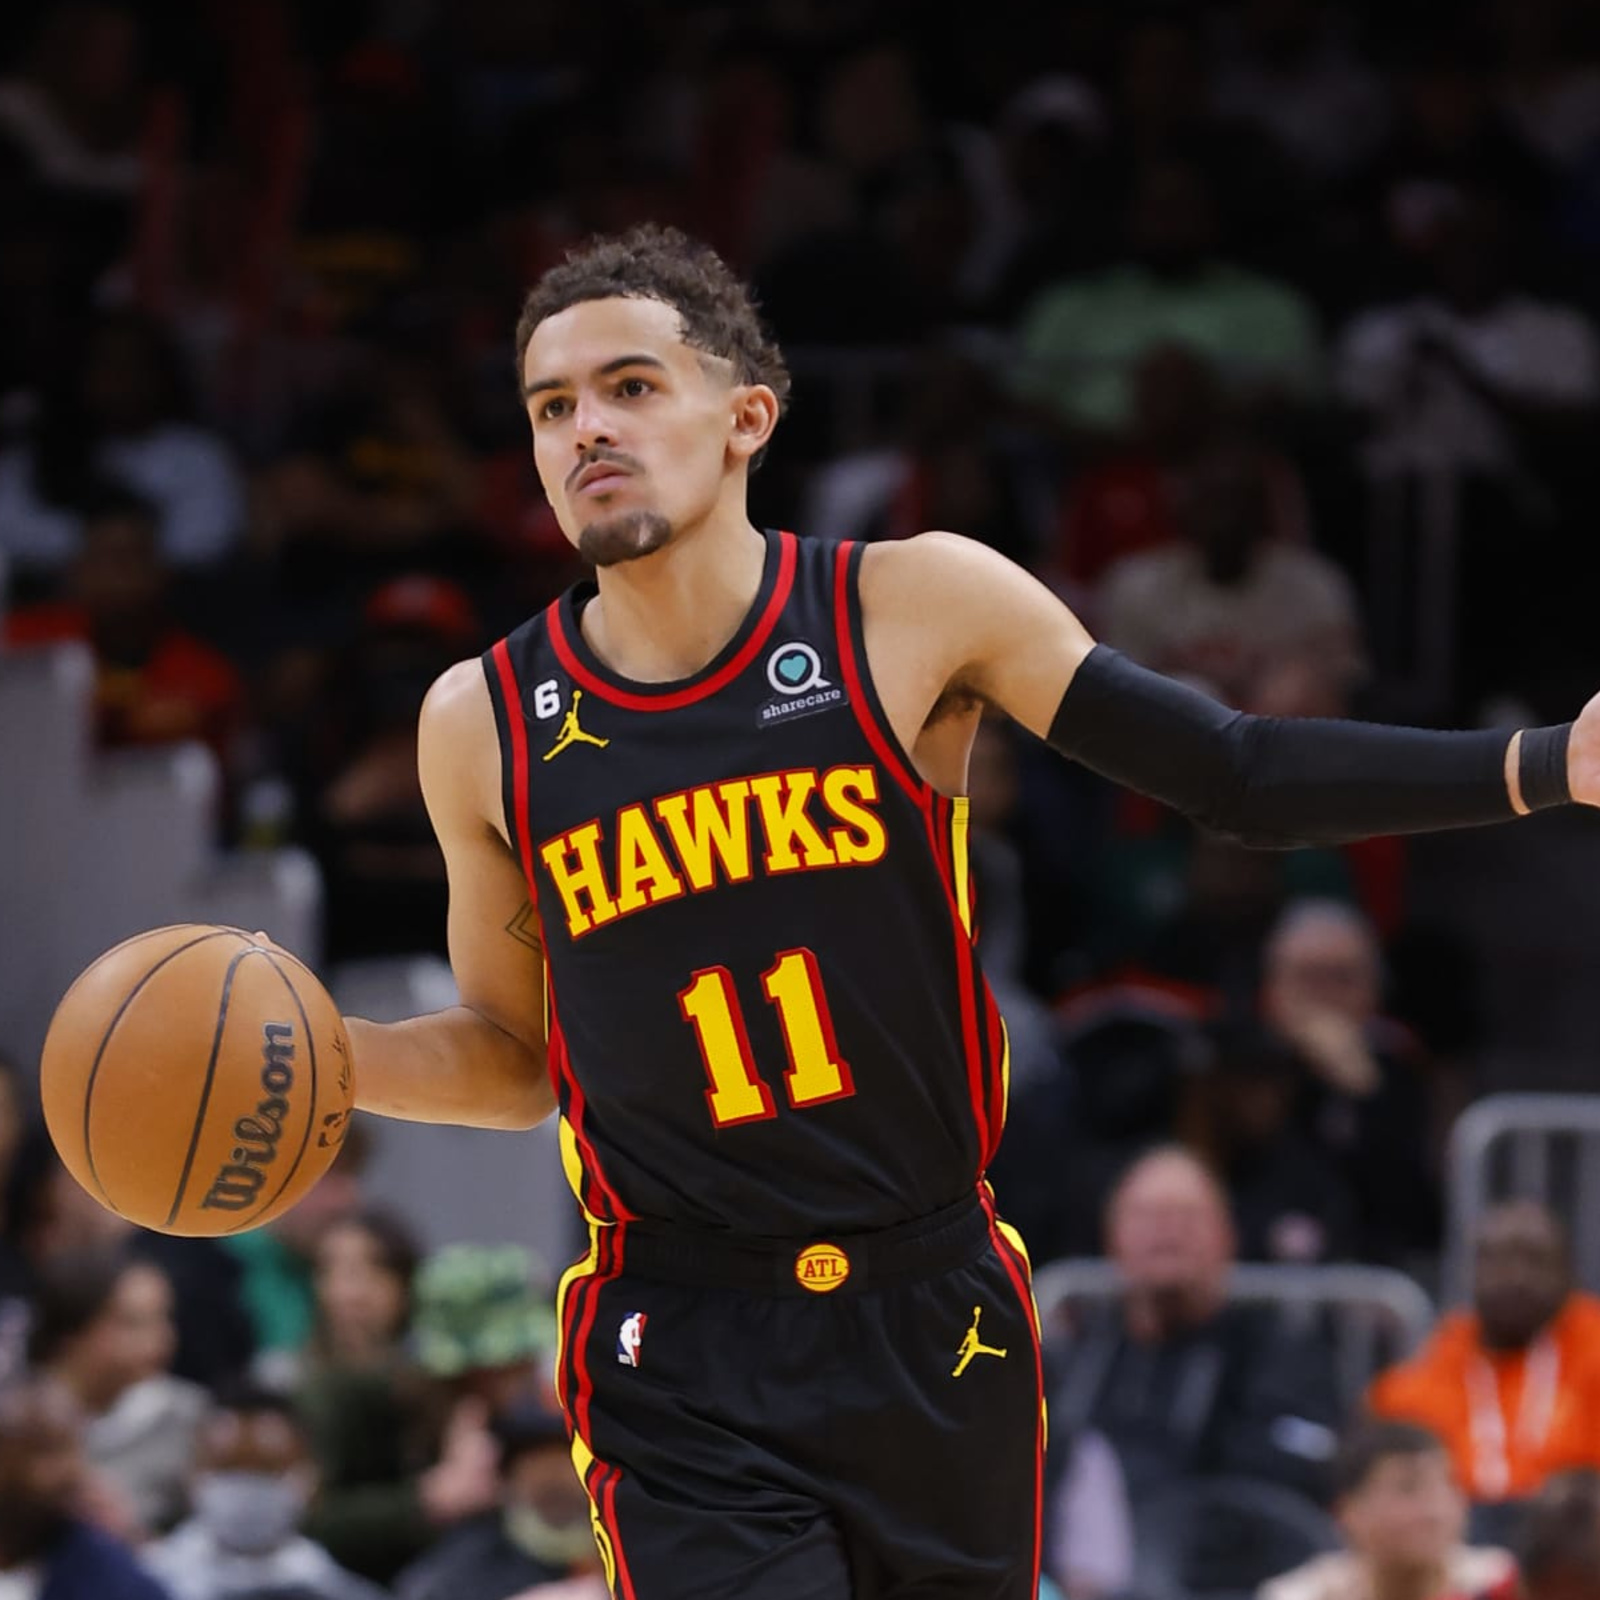 Trae Young: The next star on the NBA market?